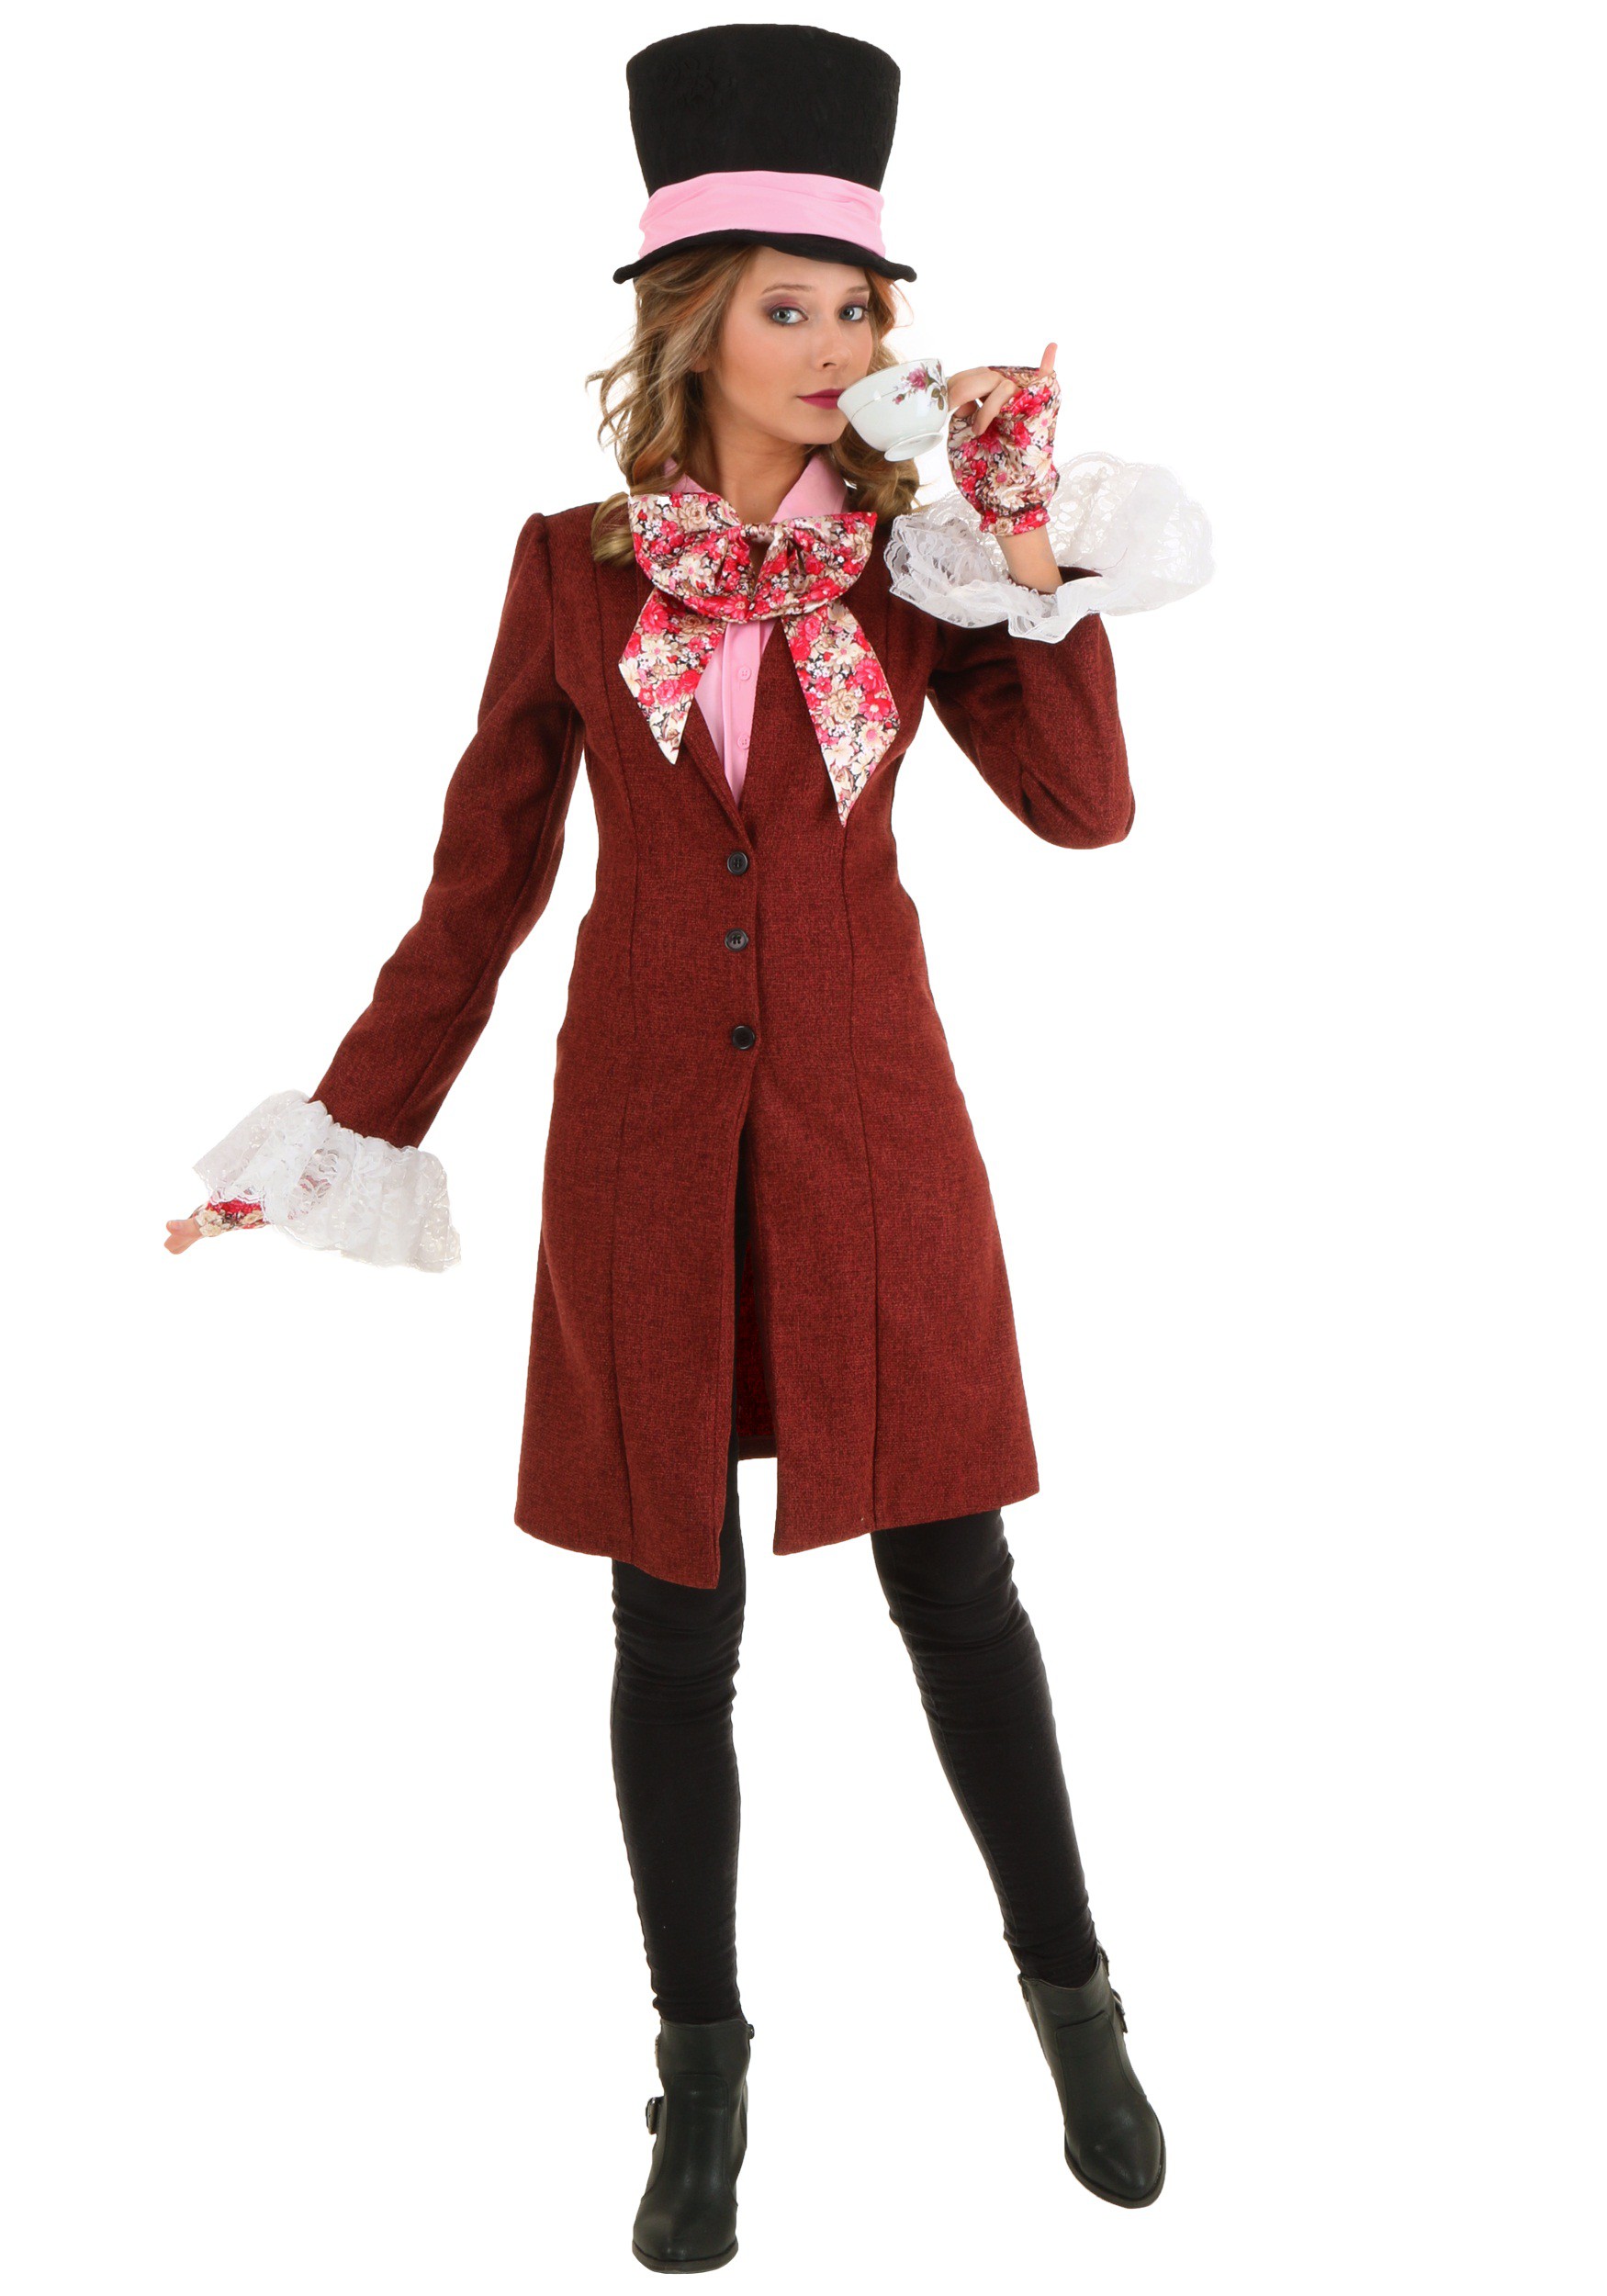 Photos - Fancy Dress Deluxe FUN Costumes  Mad Hatter Plus Size Costume for Women Red FUN2334PL 